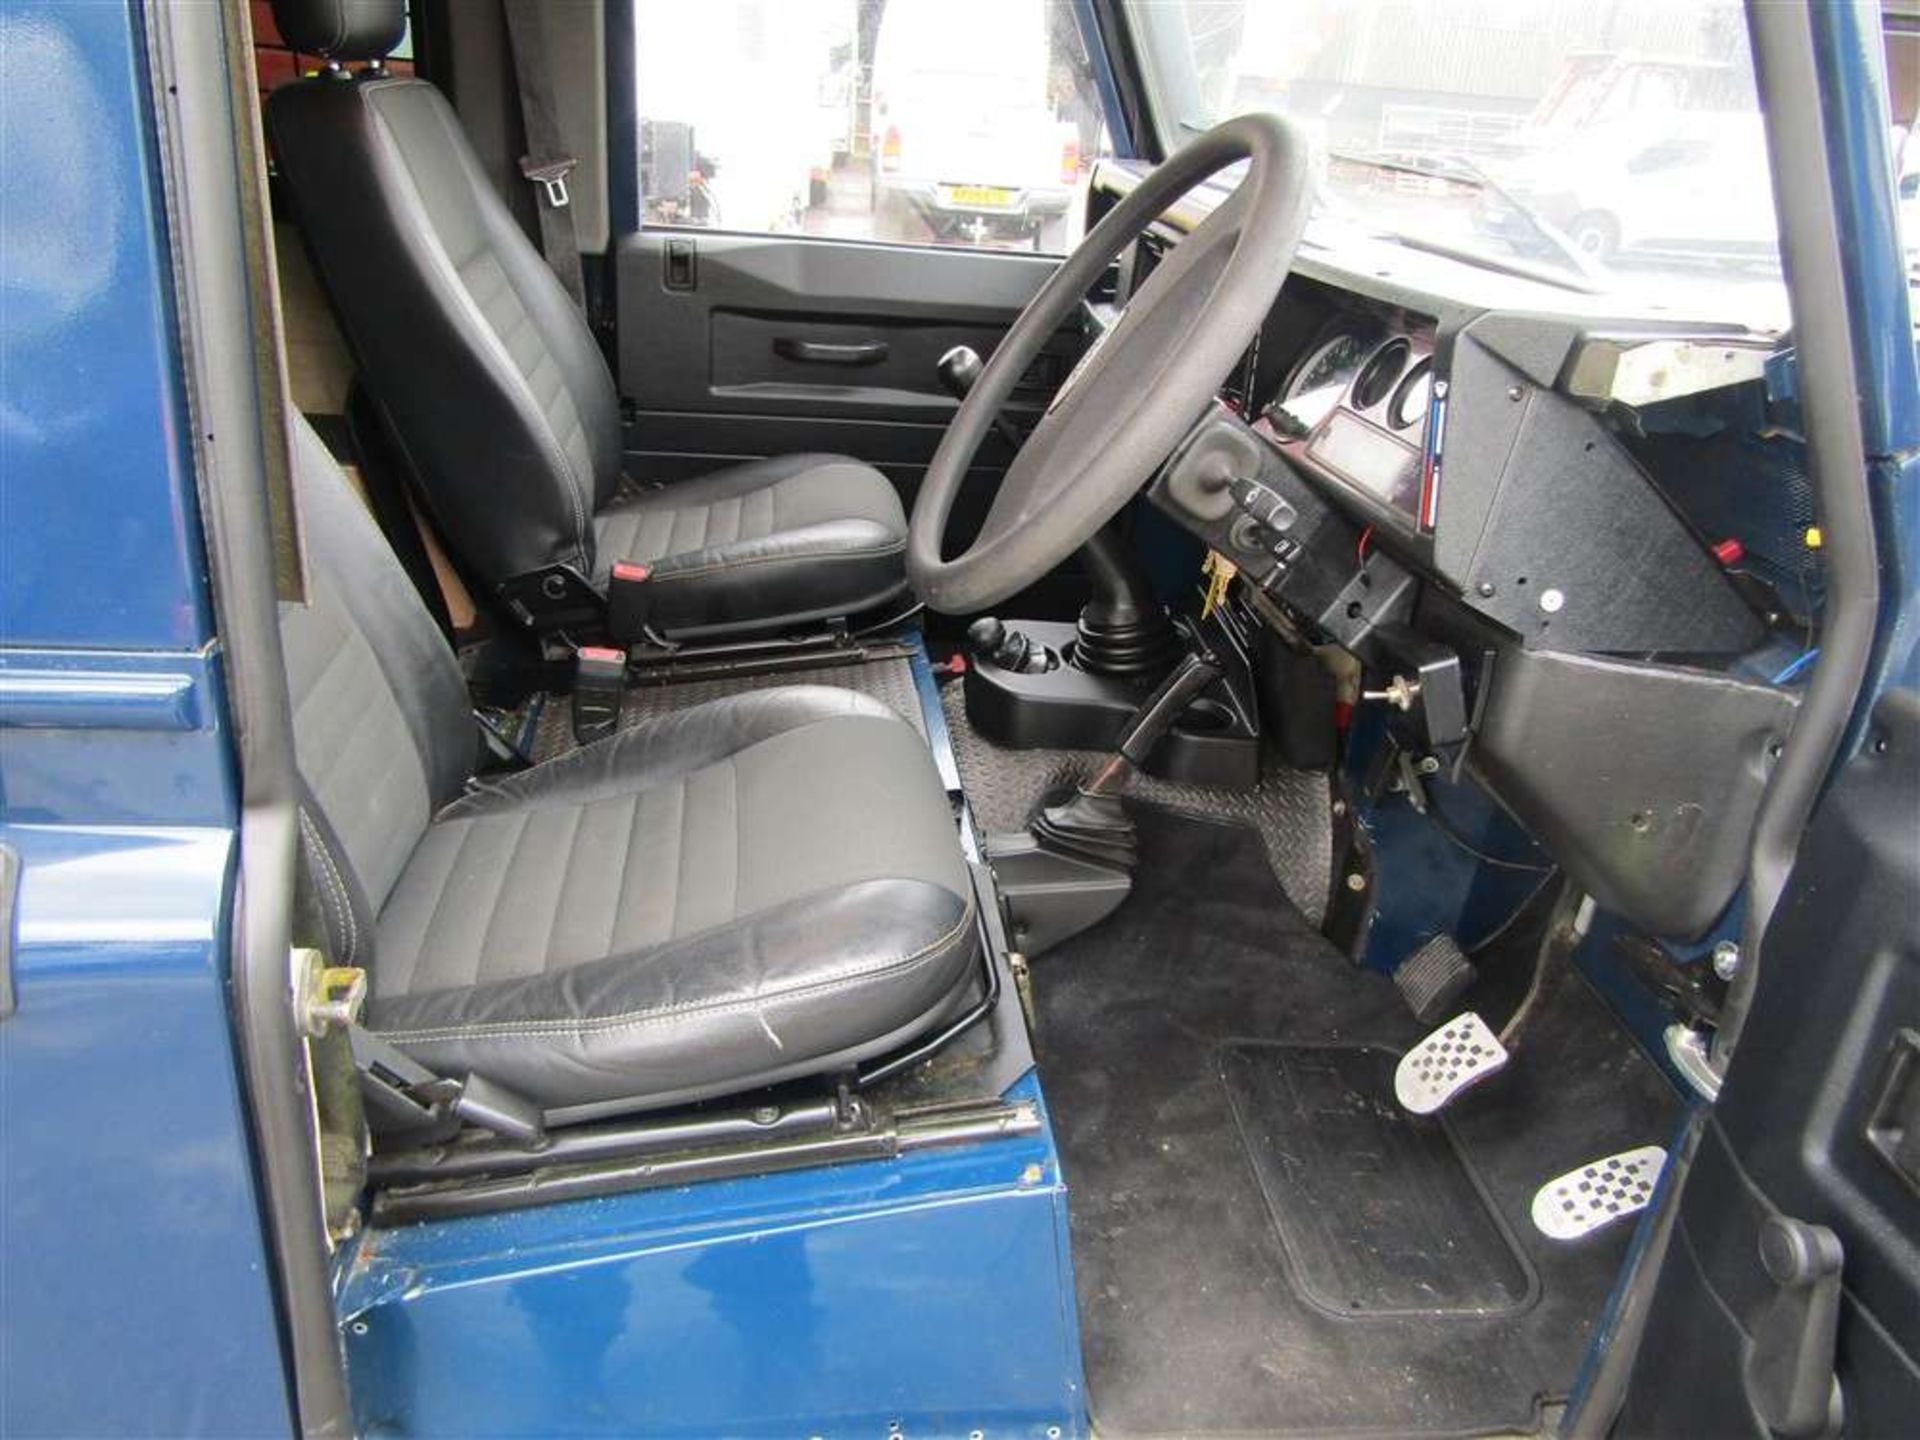 1990 G reg Landrover 90 4C SW DT - SEE ADDITIONAL INFO FOR A LIST OF EXTRAS ON THIS VEHICLE !!! - Image 5 of 6